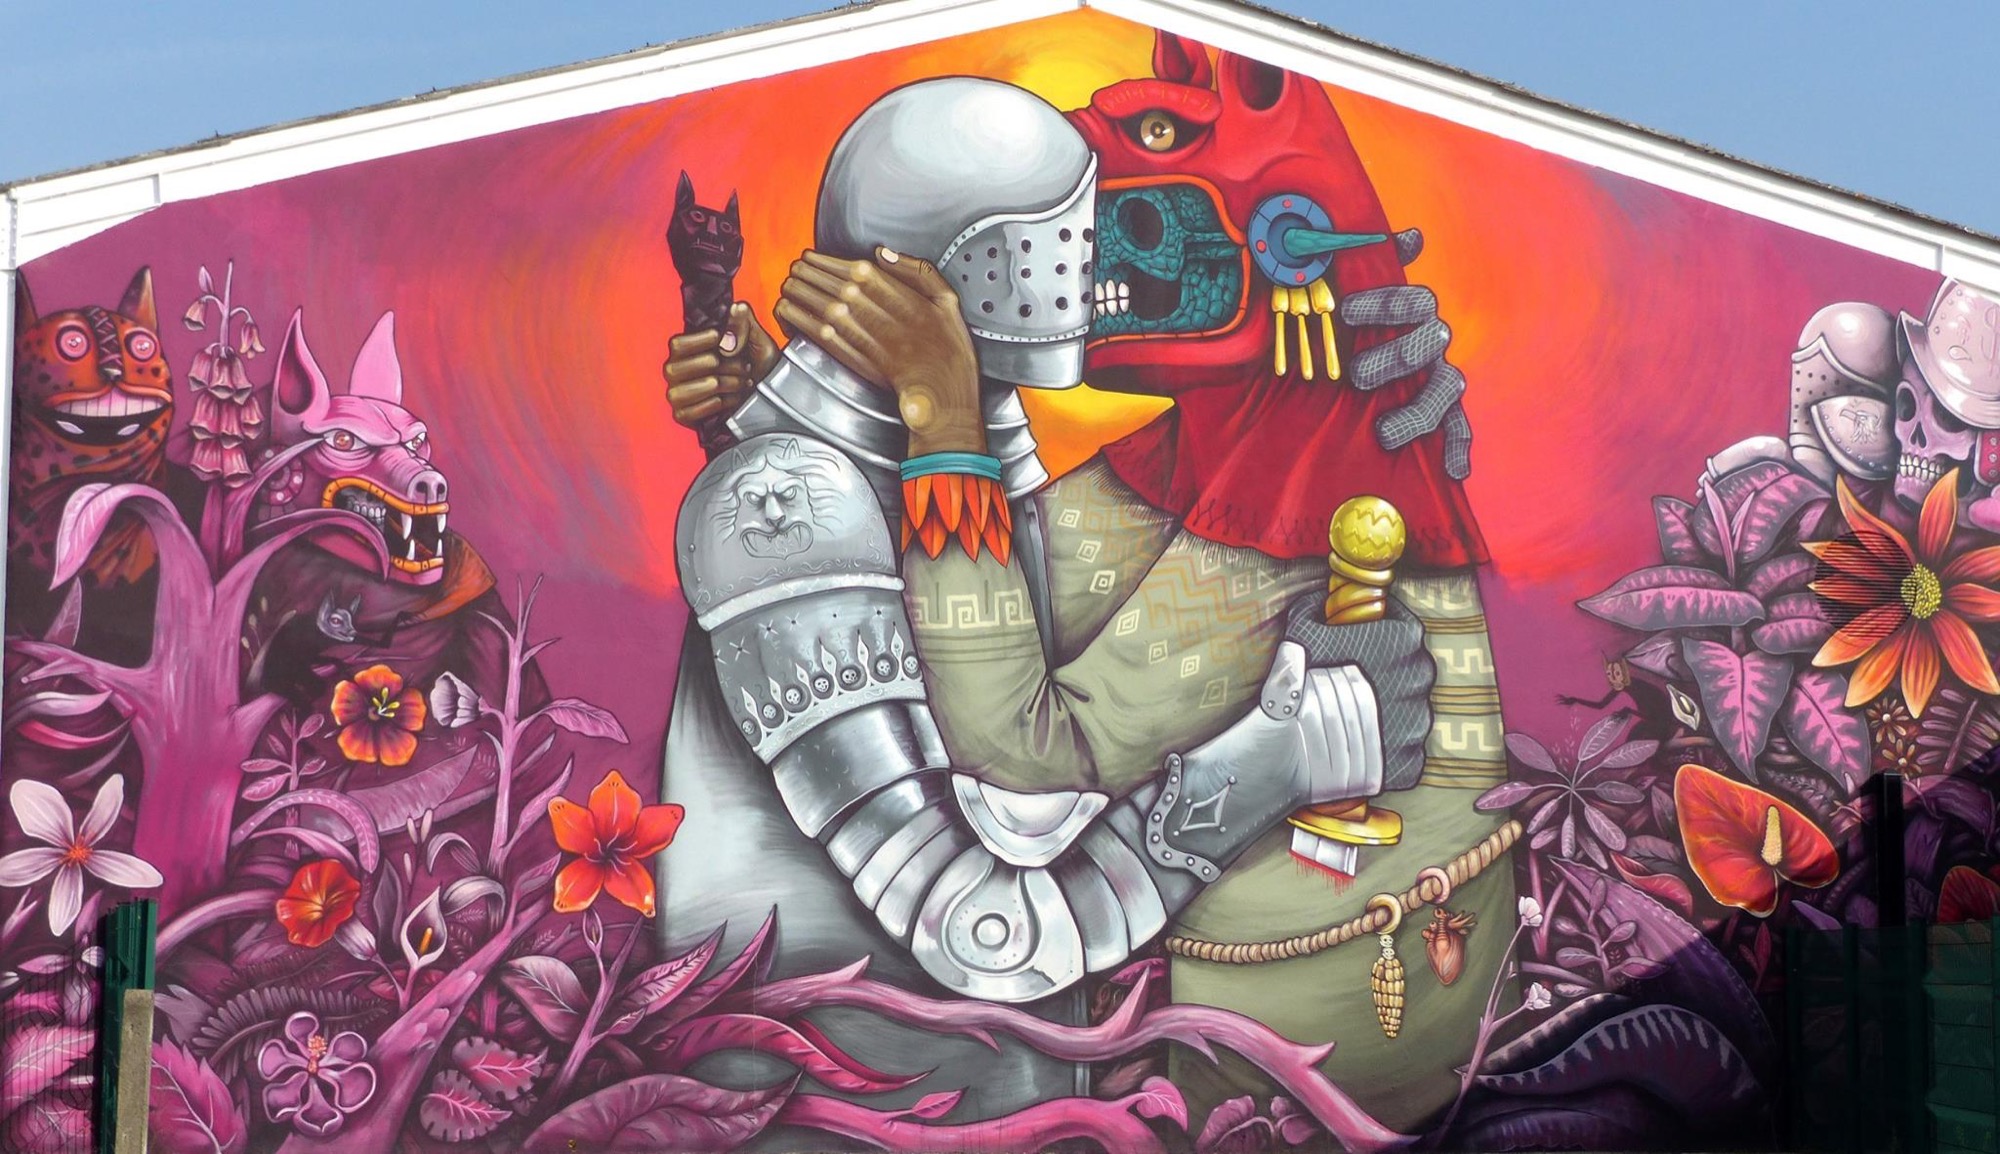 Graffiti 111  by the artist Saner captured by Rabot in Fleury-les-Aubrais France